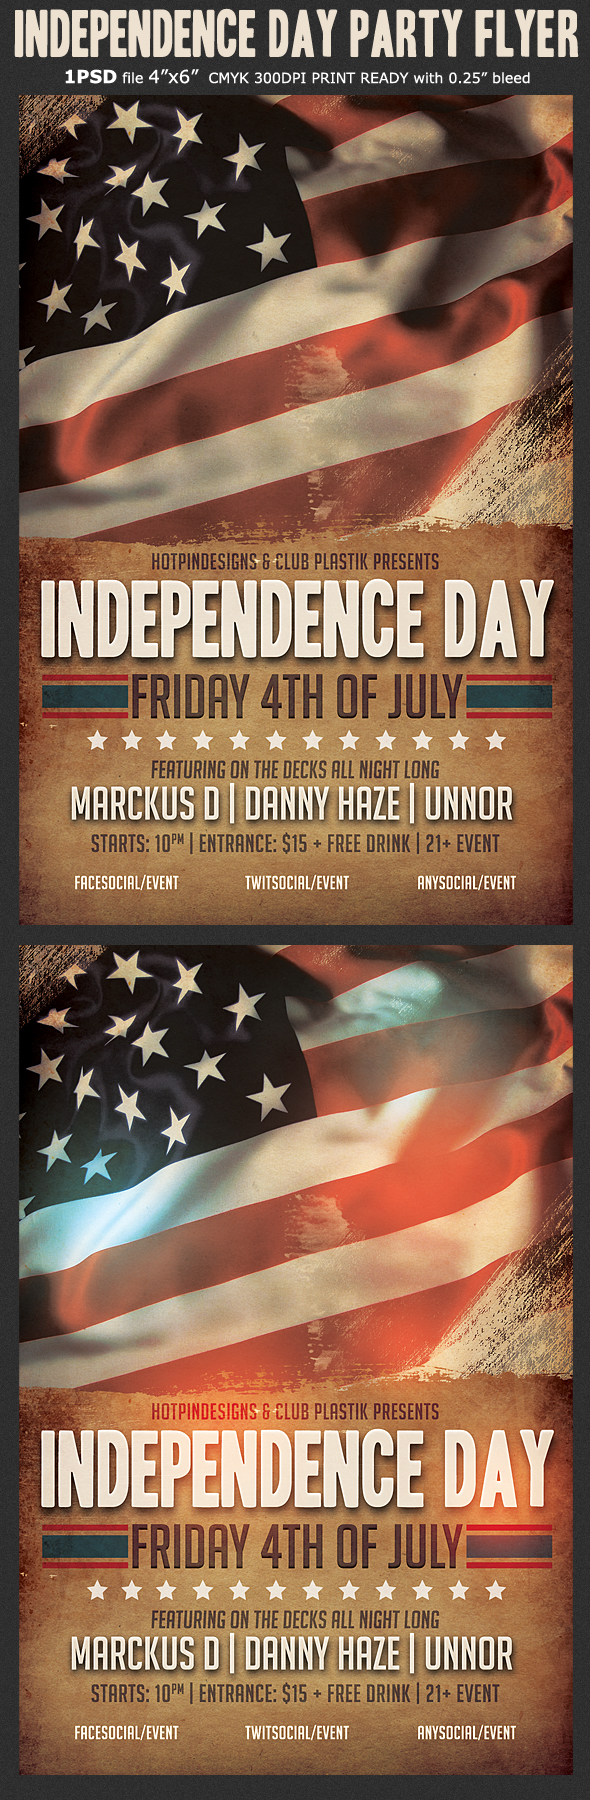 independence day 4th of july memorial day flyer flyer template July 4th american fireworks flag modern Invitation poster BBQ independence day flyer